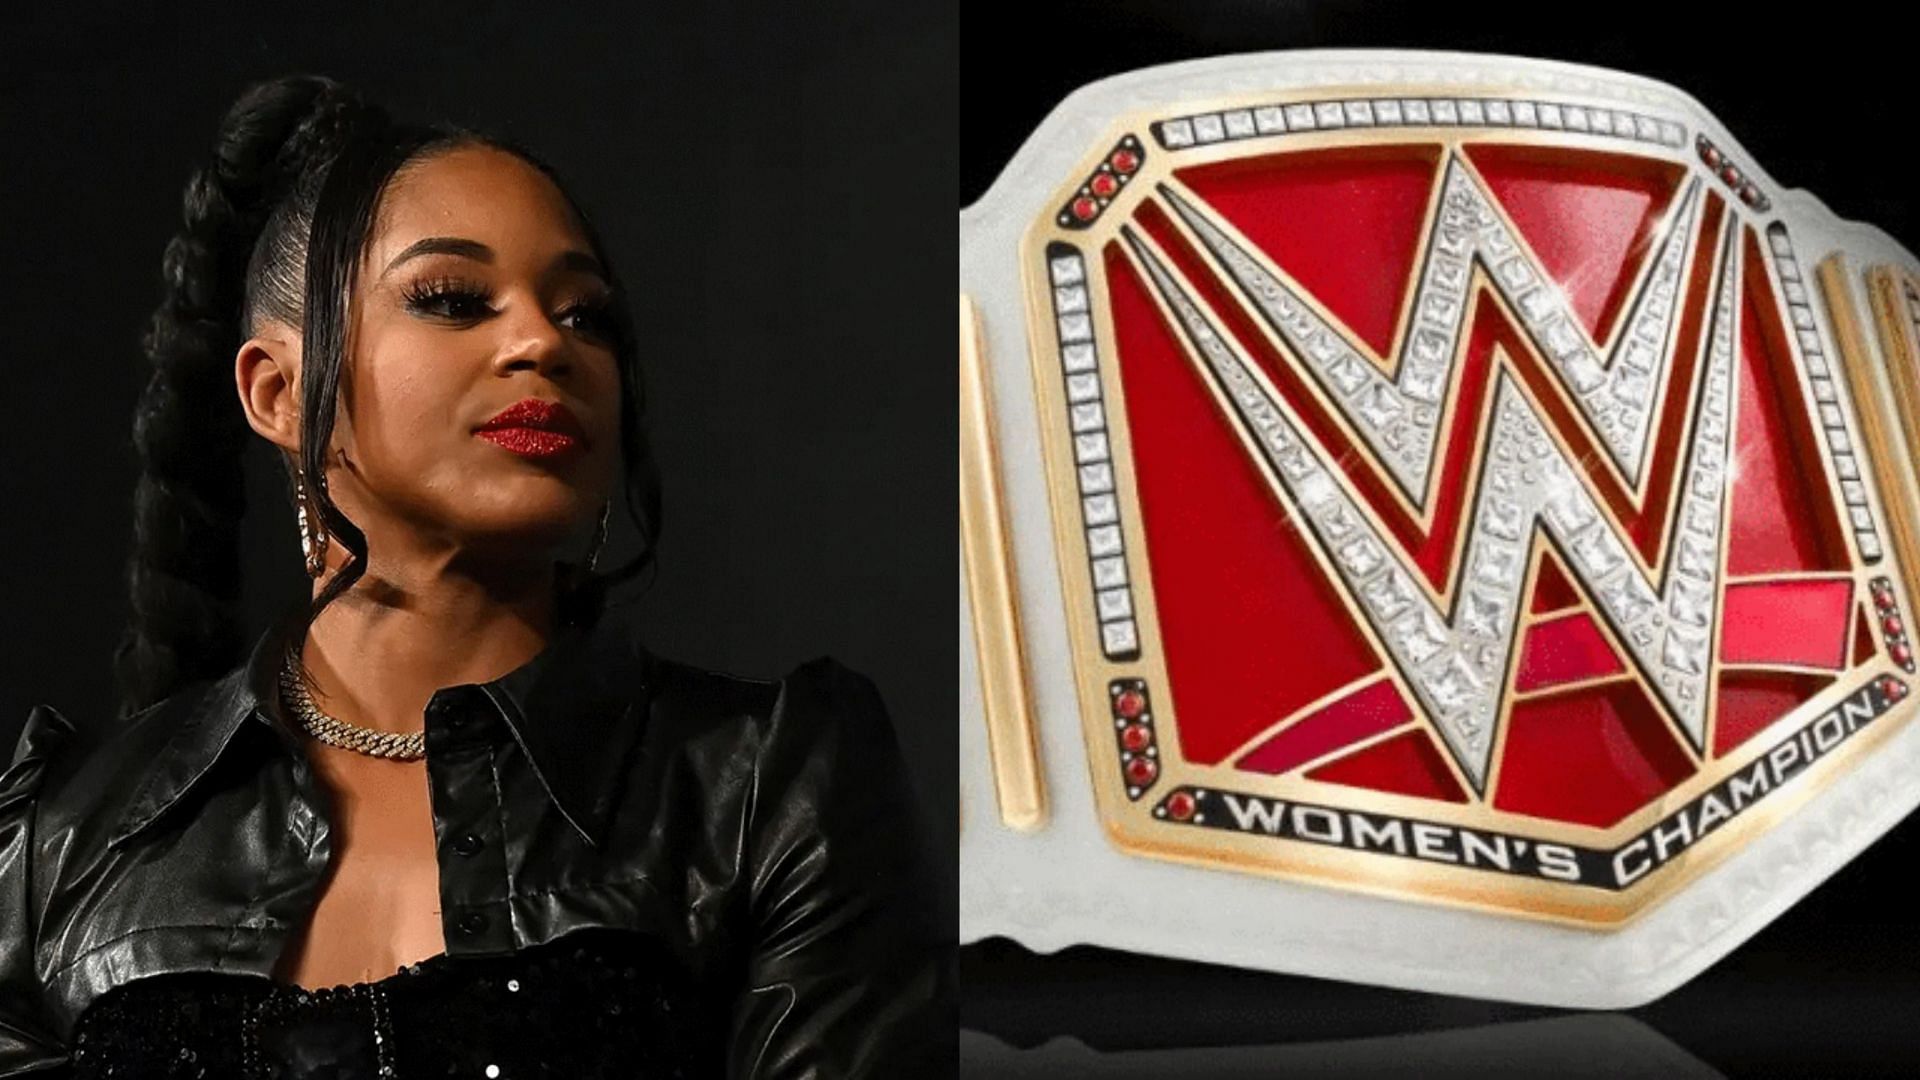 Bianca Belair and Bayley fell victim to an assault from Nikki Cross on RAW